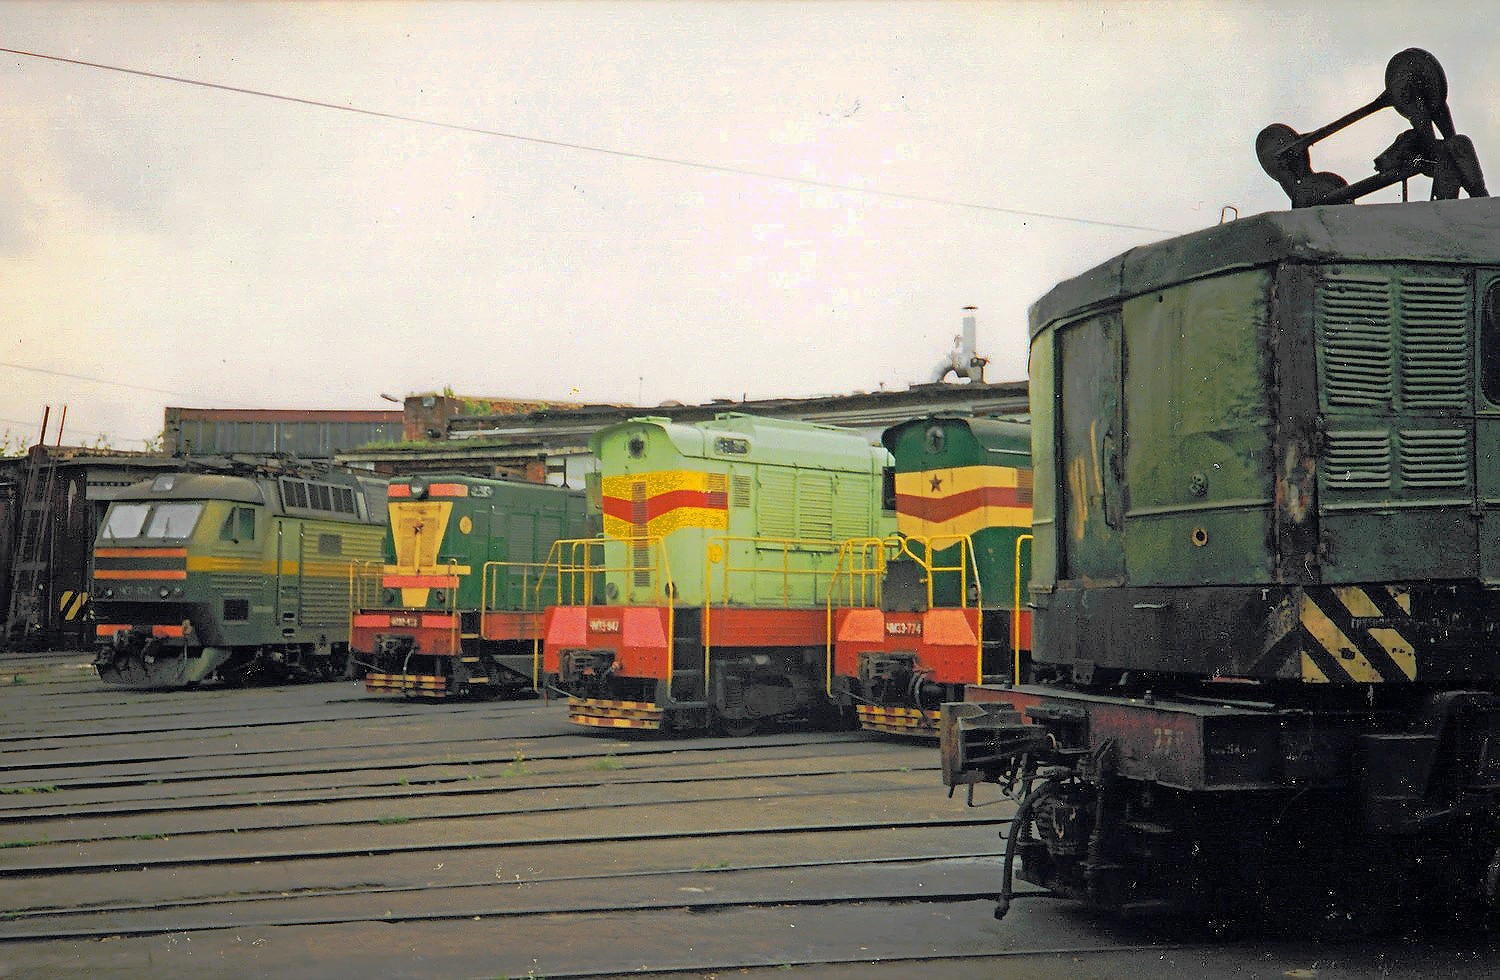 Moscow Railway — Station and Hauls